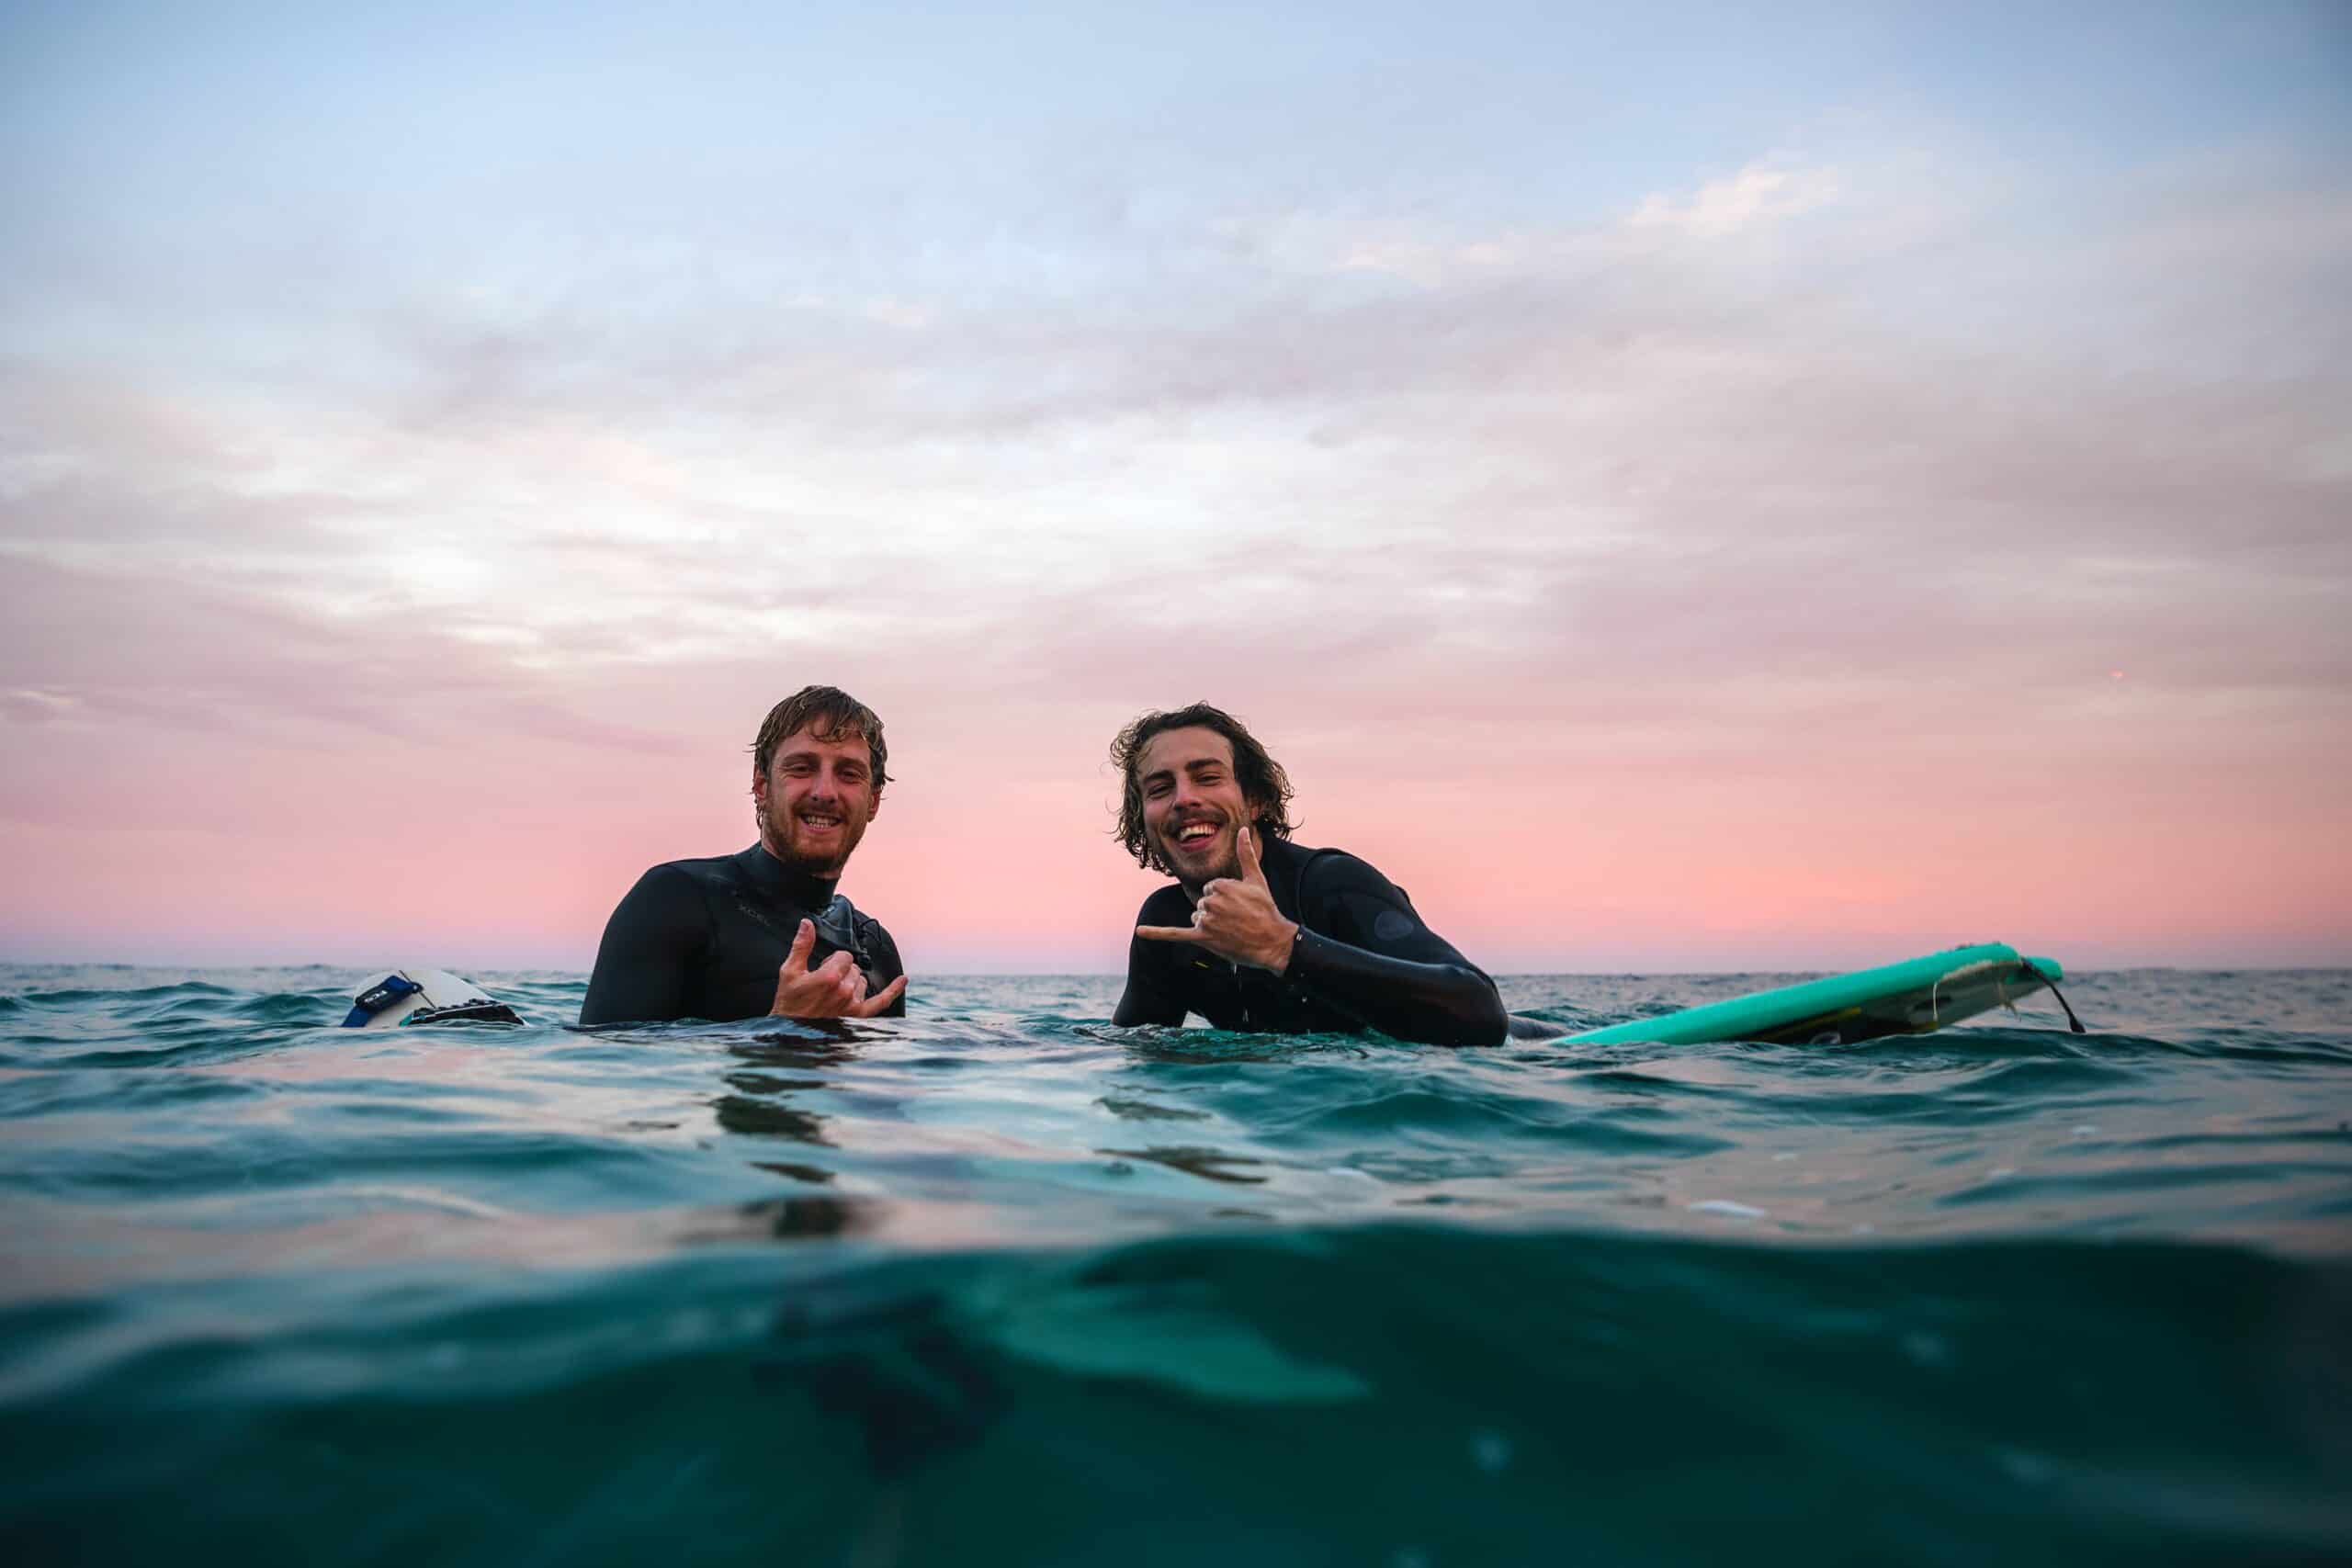 31 Surf Slangs - Friendly List of Surfer Lingo and Terms